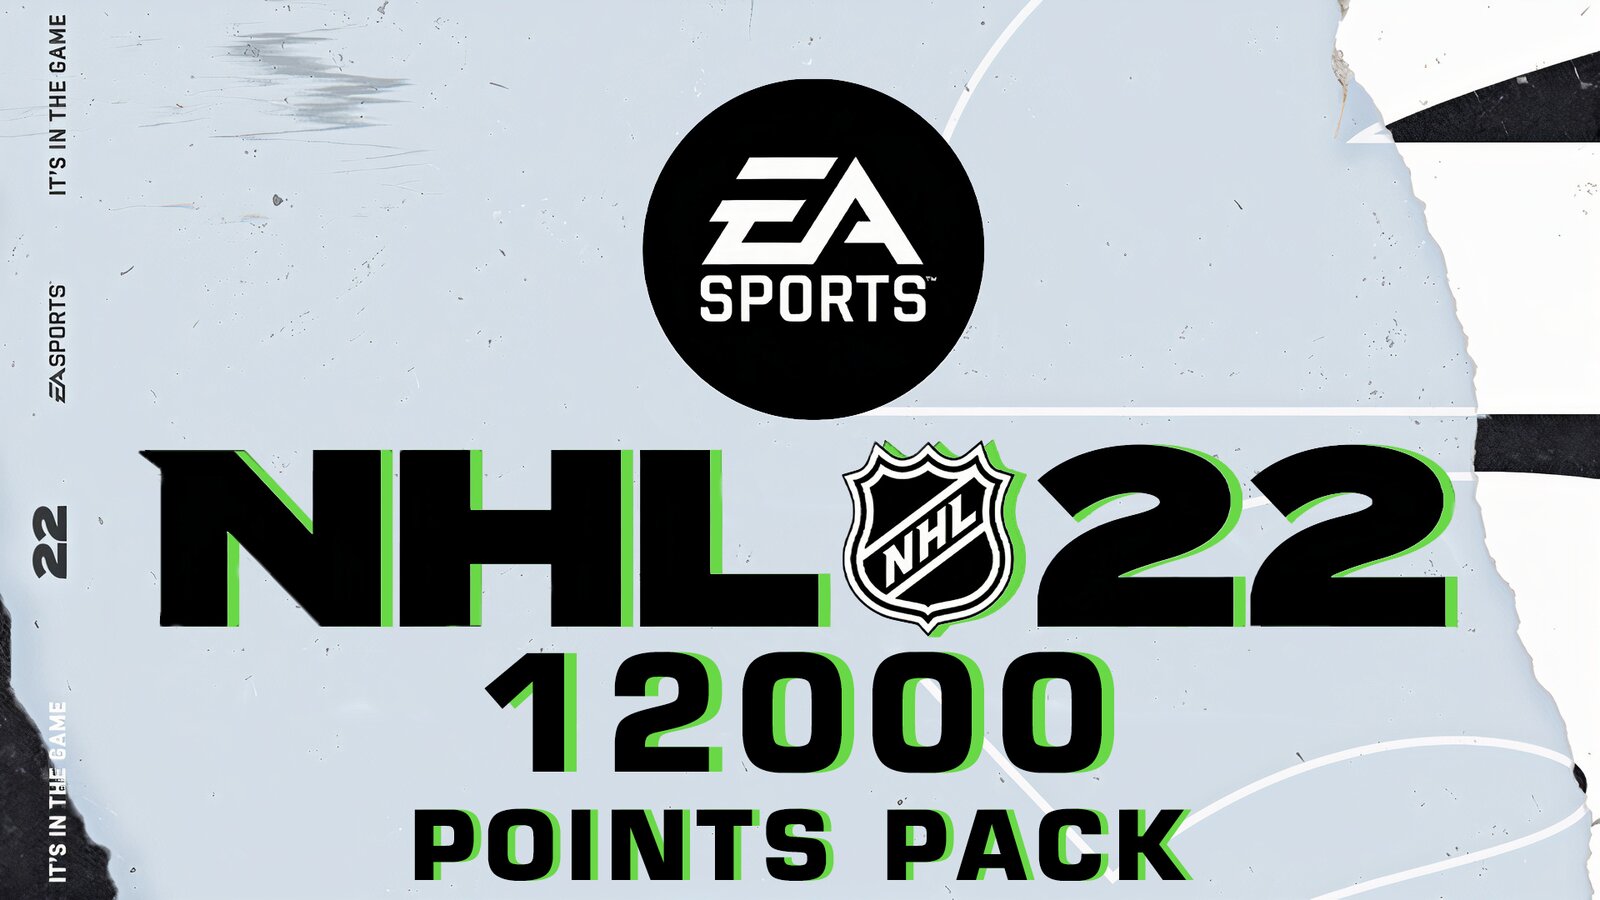 NHL 22 - 12000 Points Pack